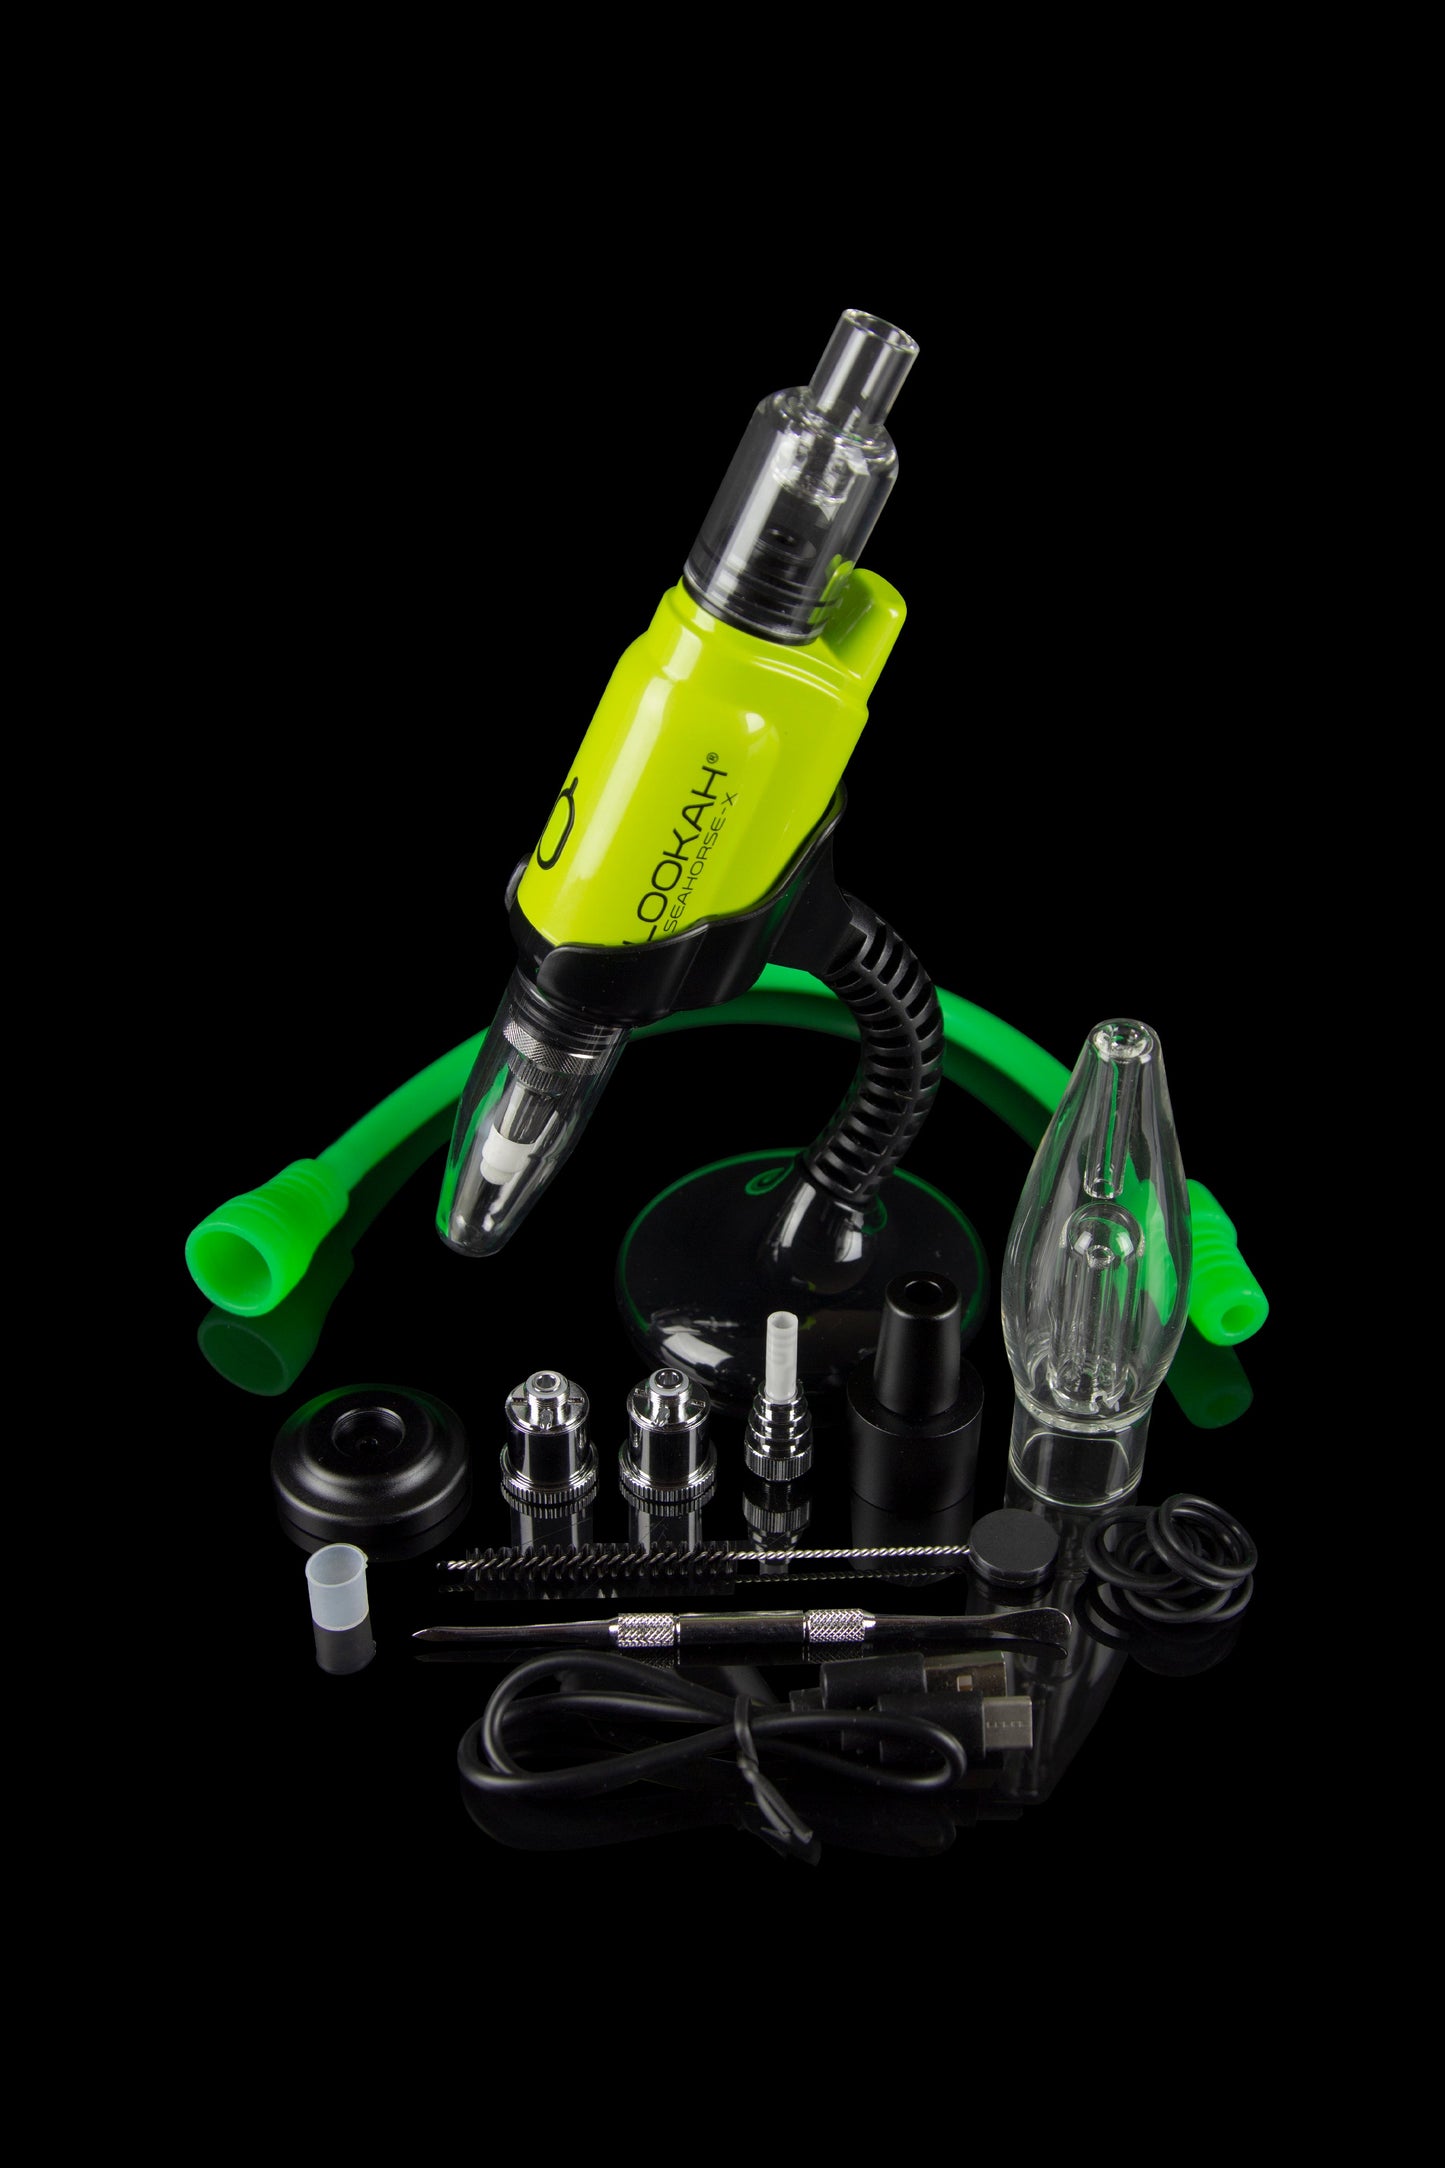 Lookah Seahorse X All In One Electric Dab Kit Best Sales Price - Vaporizers